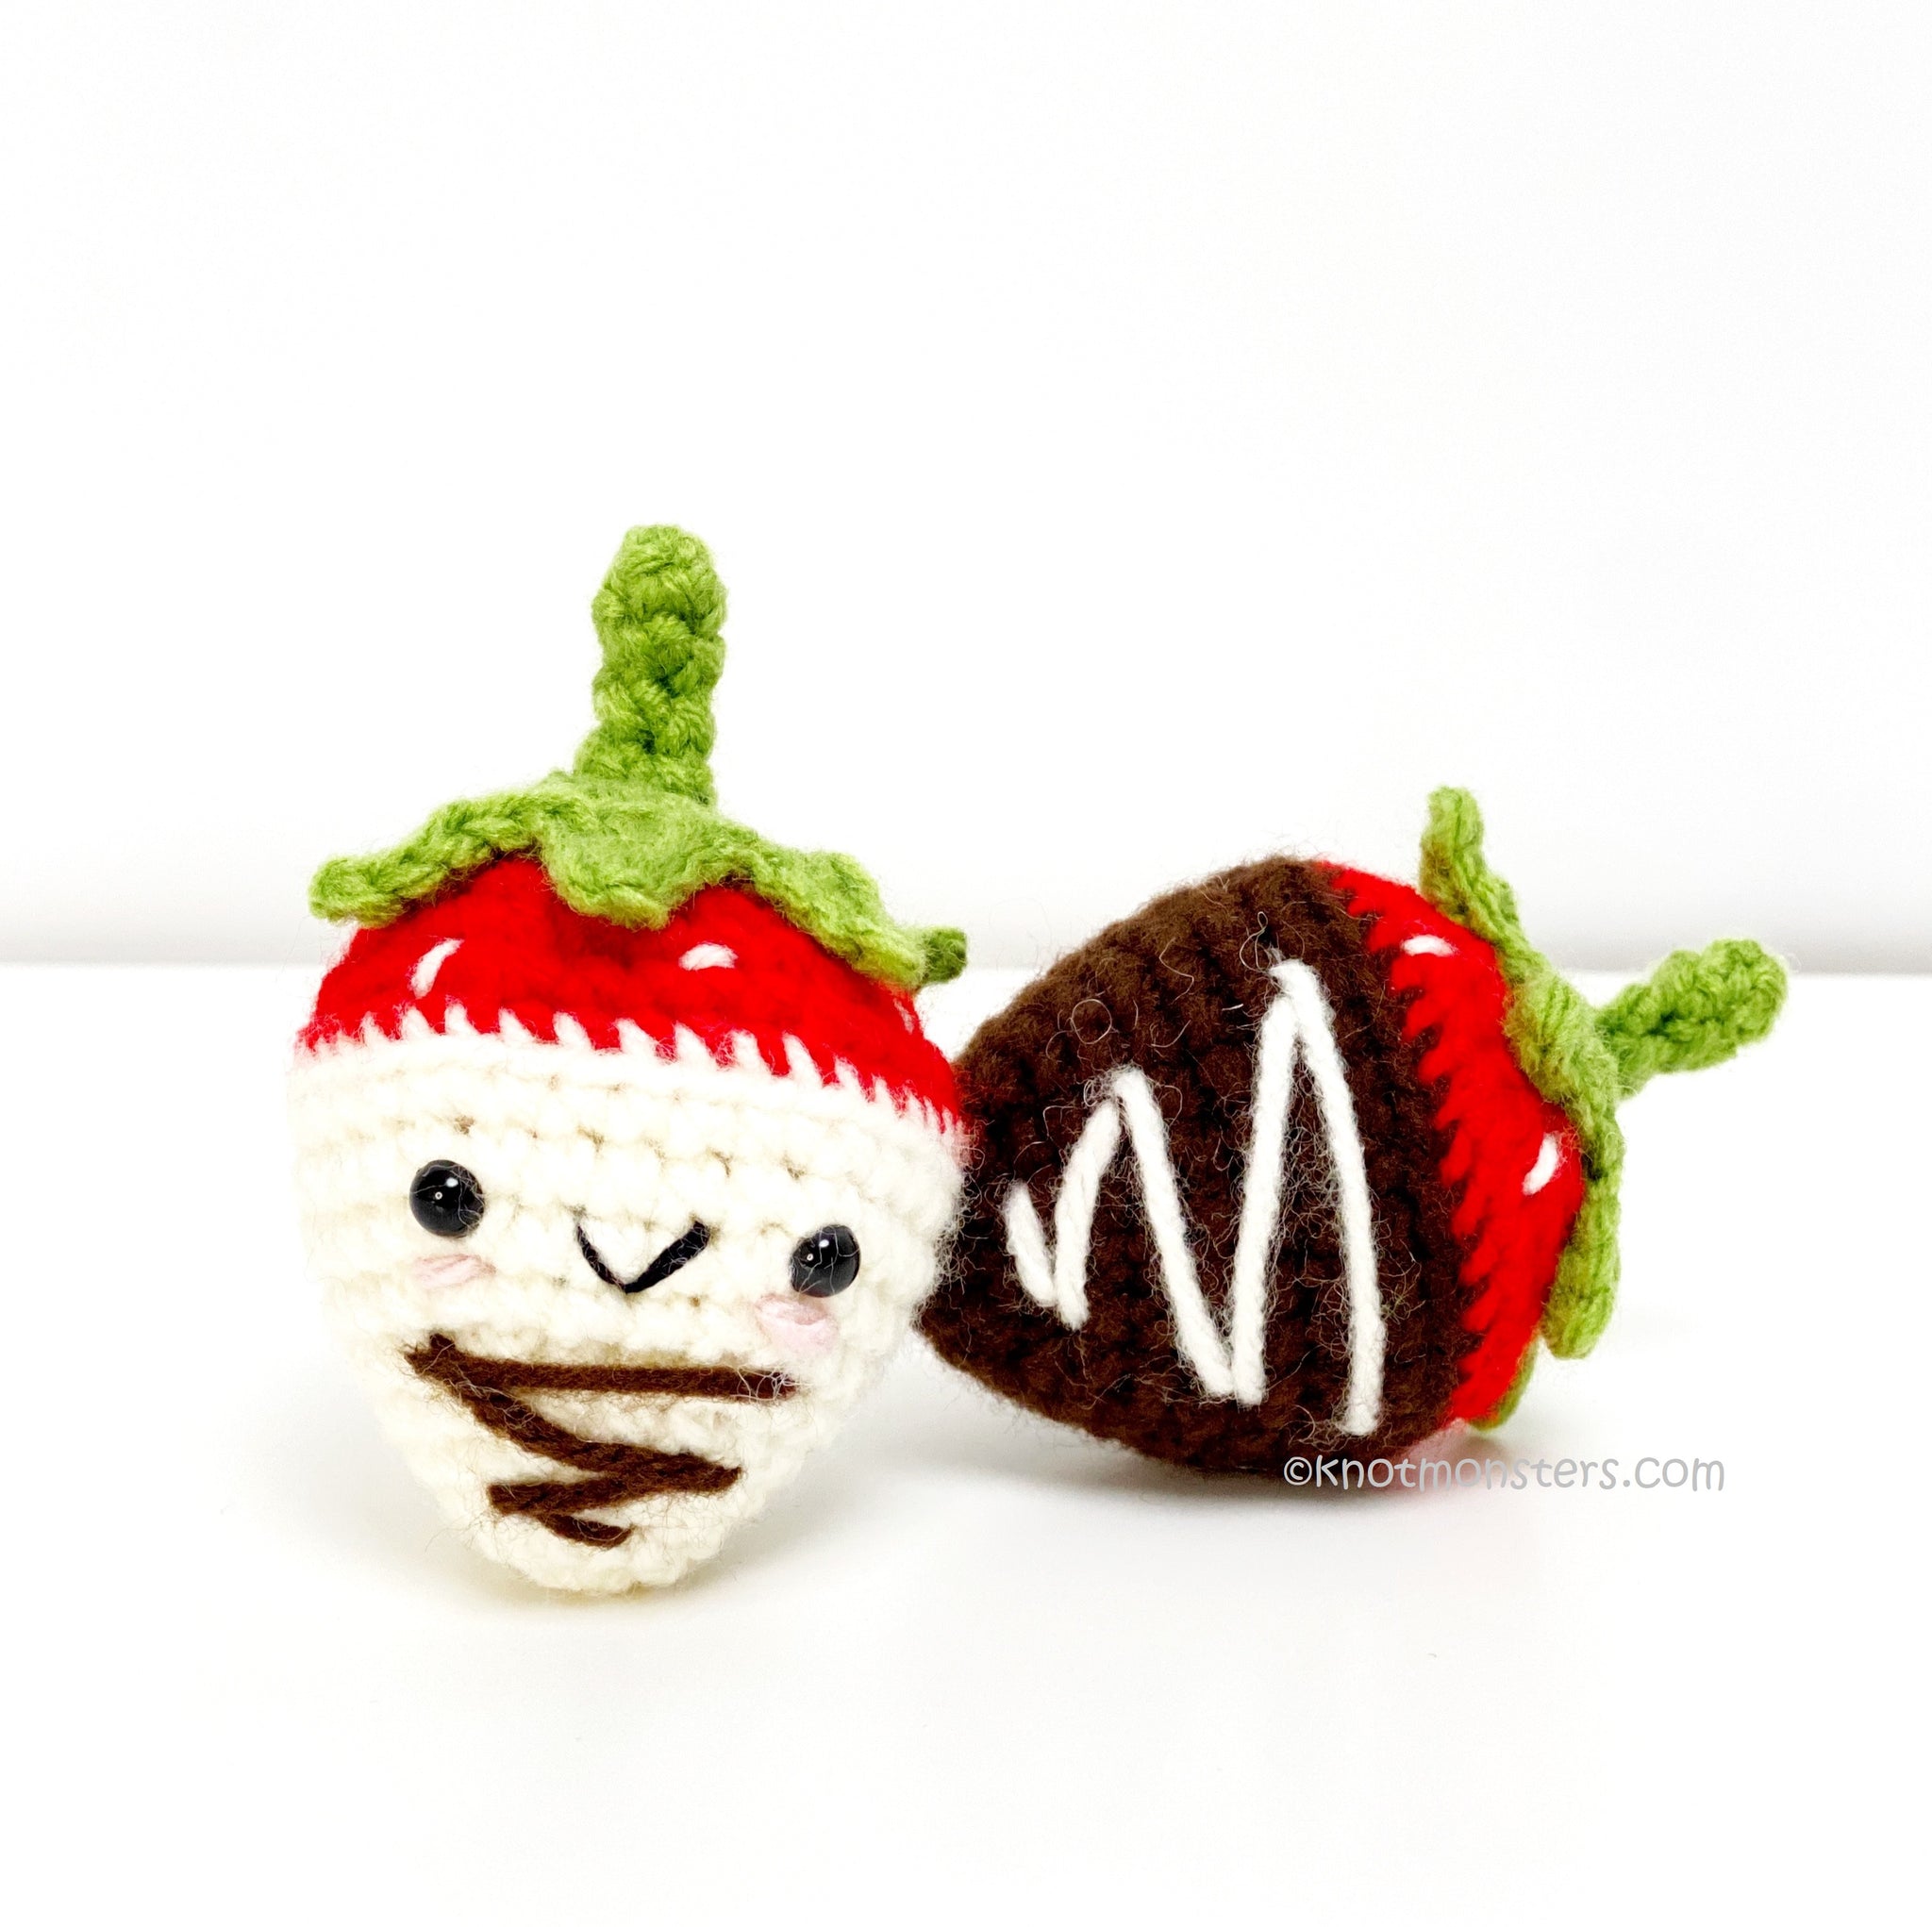 Chocolate Covered Strawberries - Sweets and Treats (DIGITAL PATTERN)